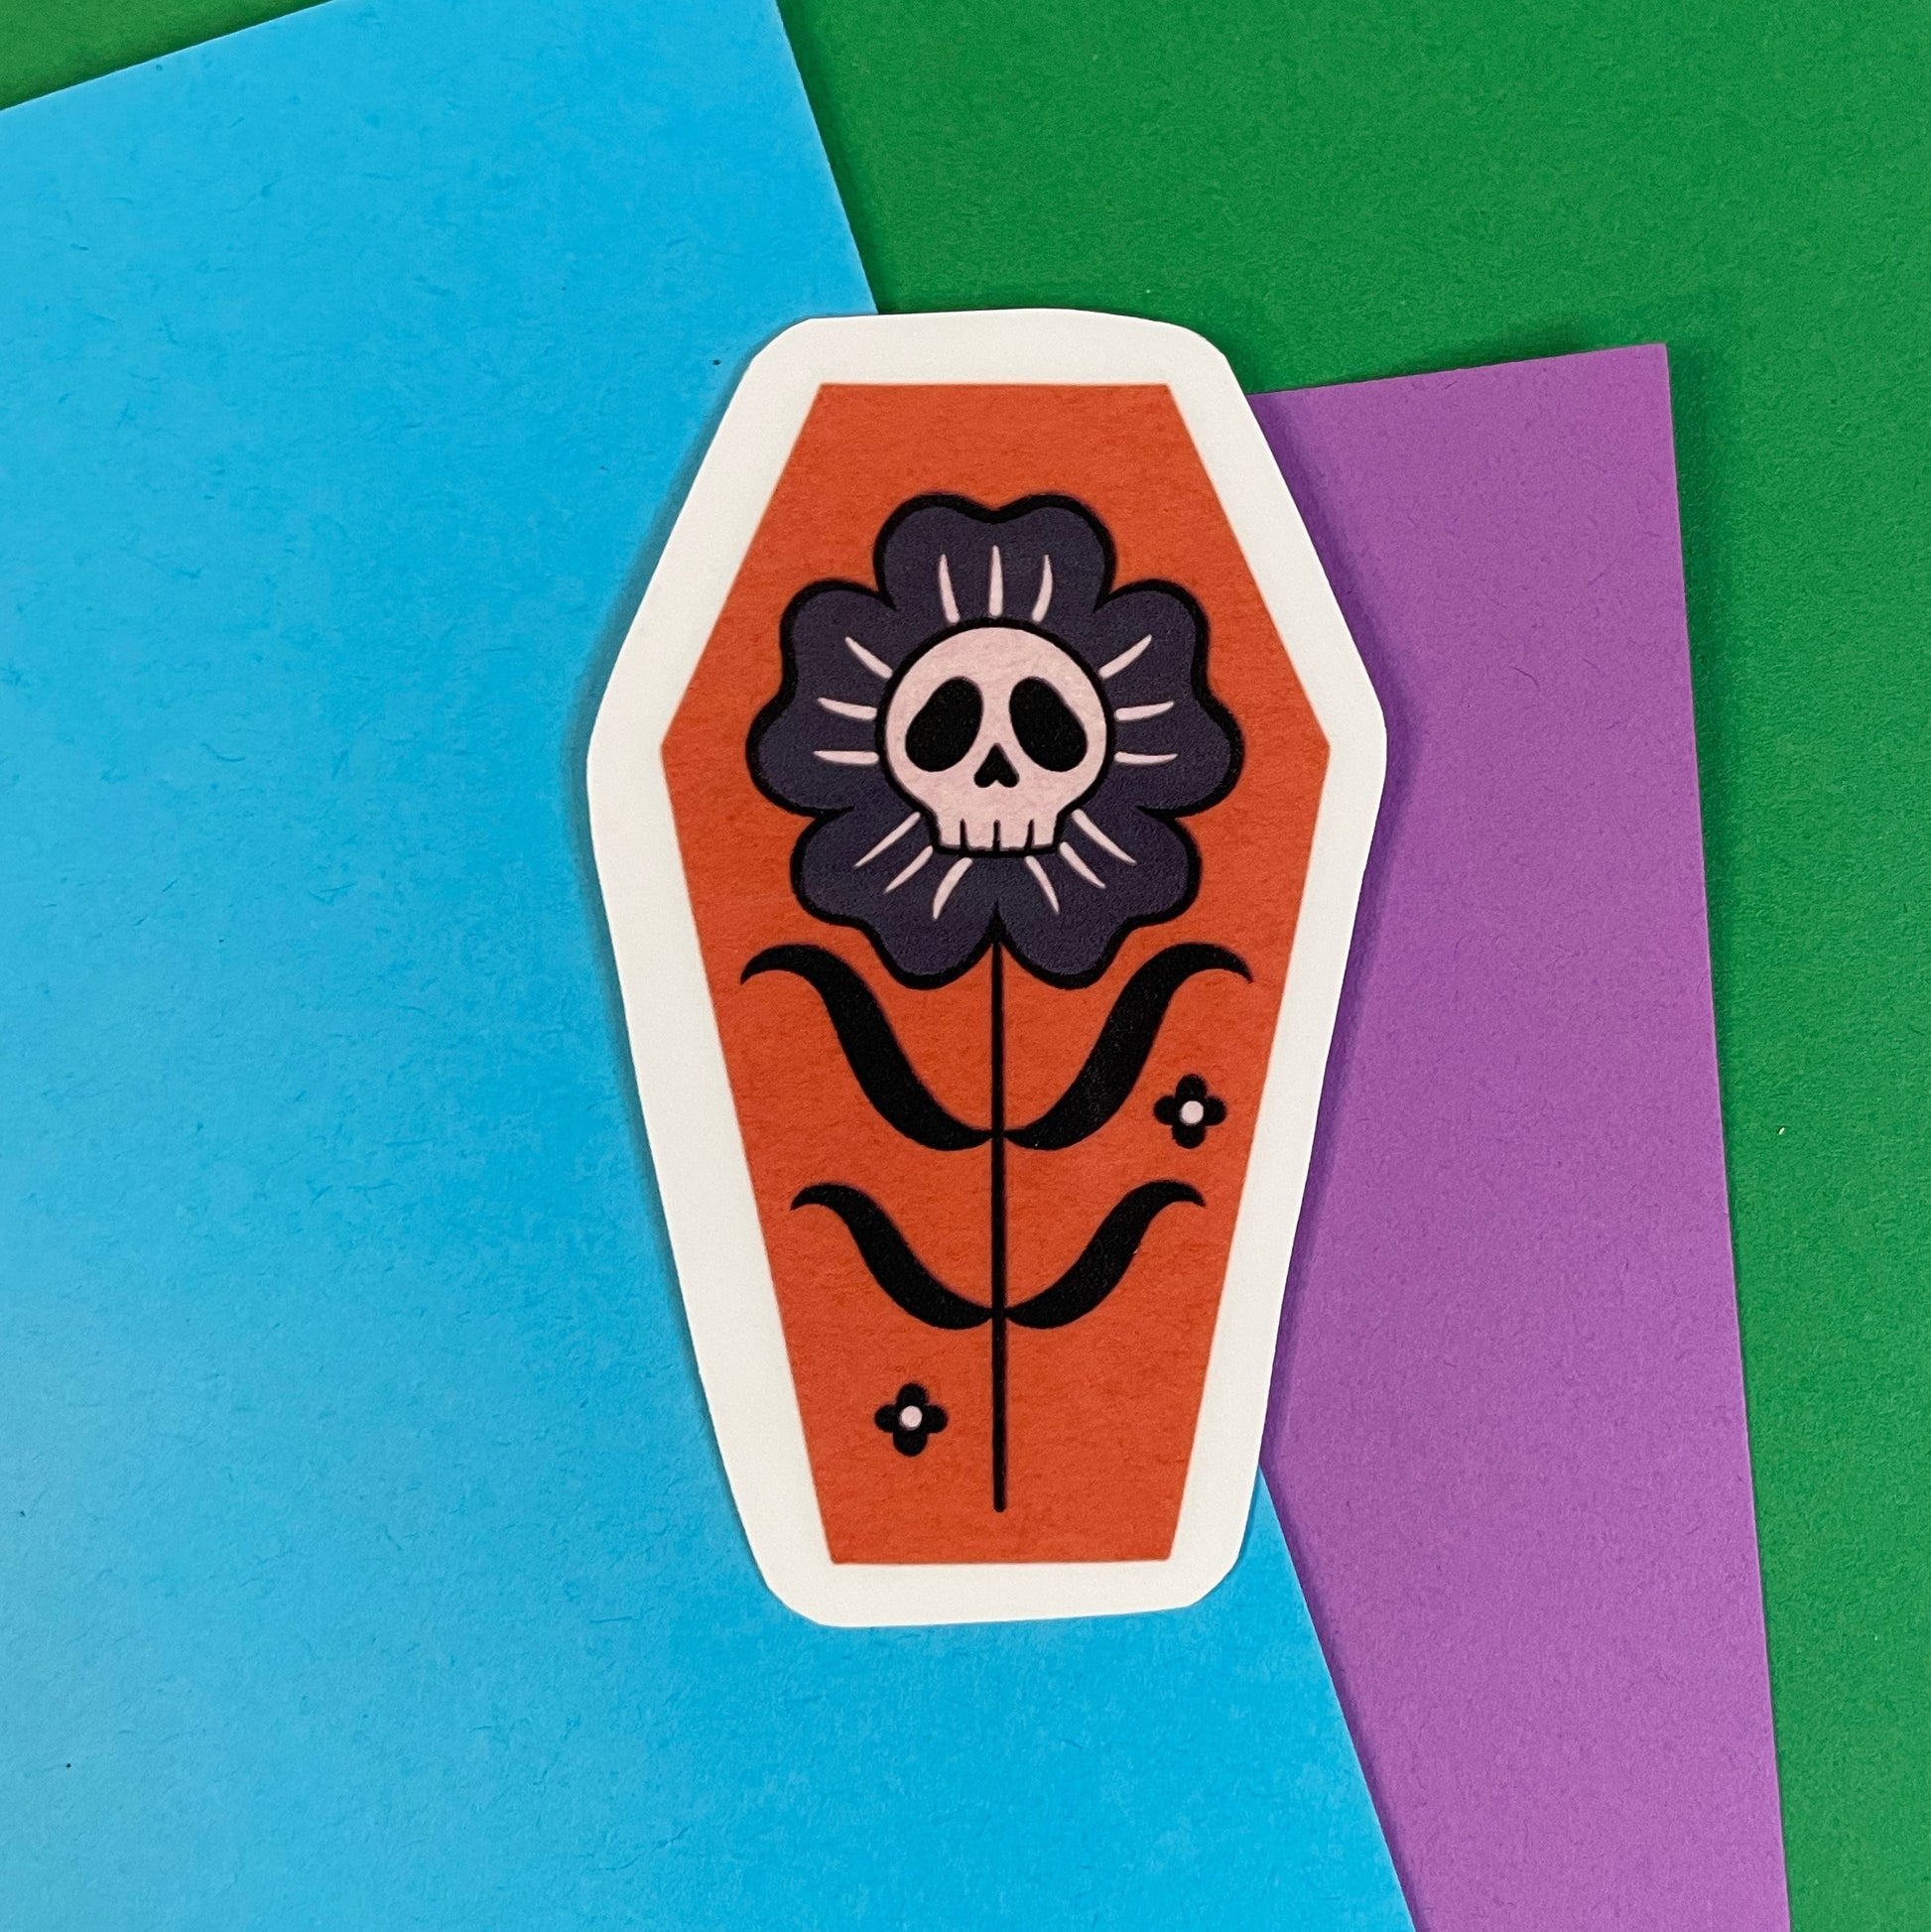 A coffin shaped sticker with an orange background, featuring a black and gray flower with a skull in the center.